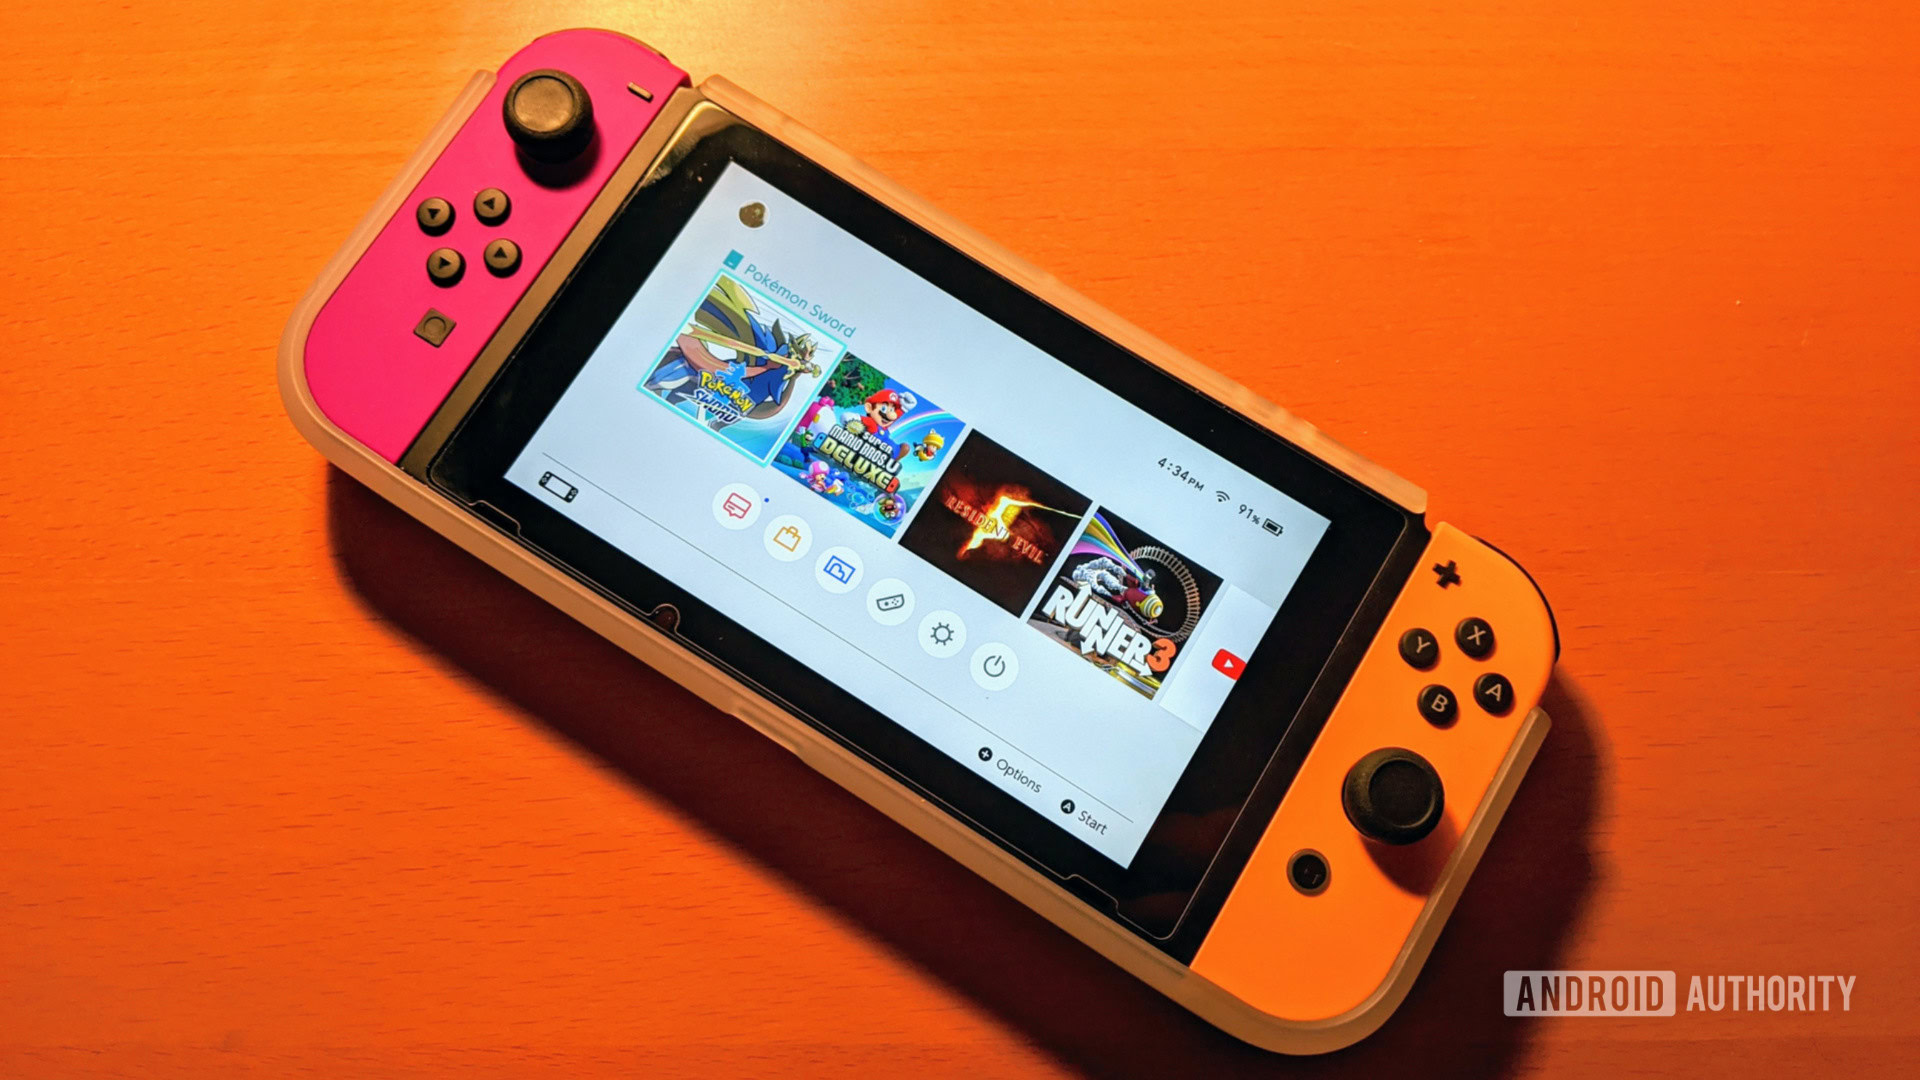 The Best Nintendo Switch Games for Kids